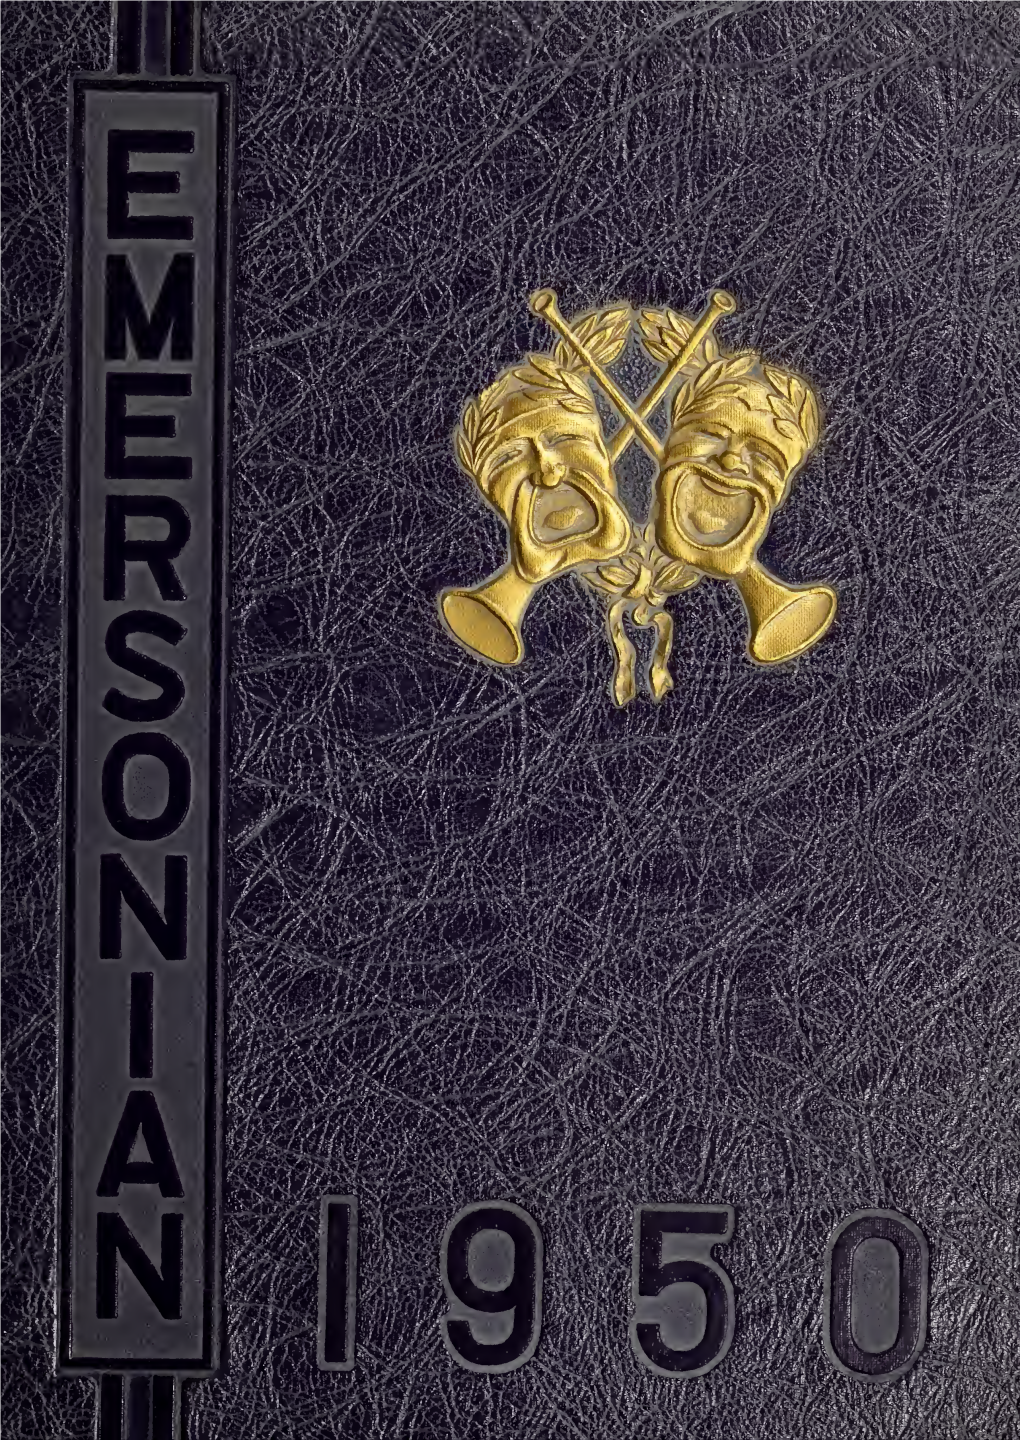 Emersonian : [Emerson College Yearbook]